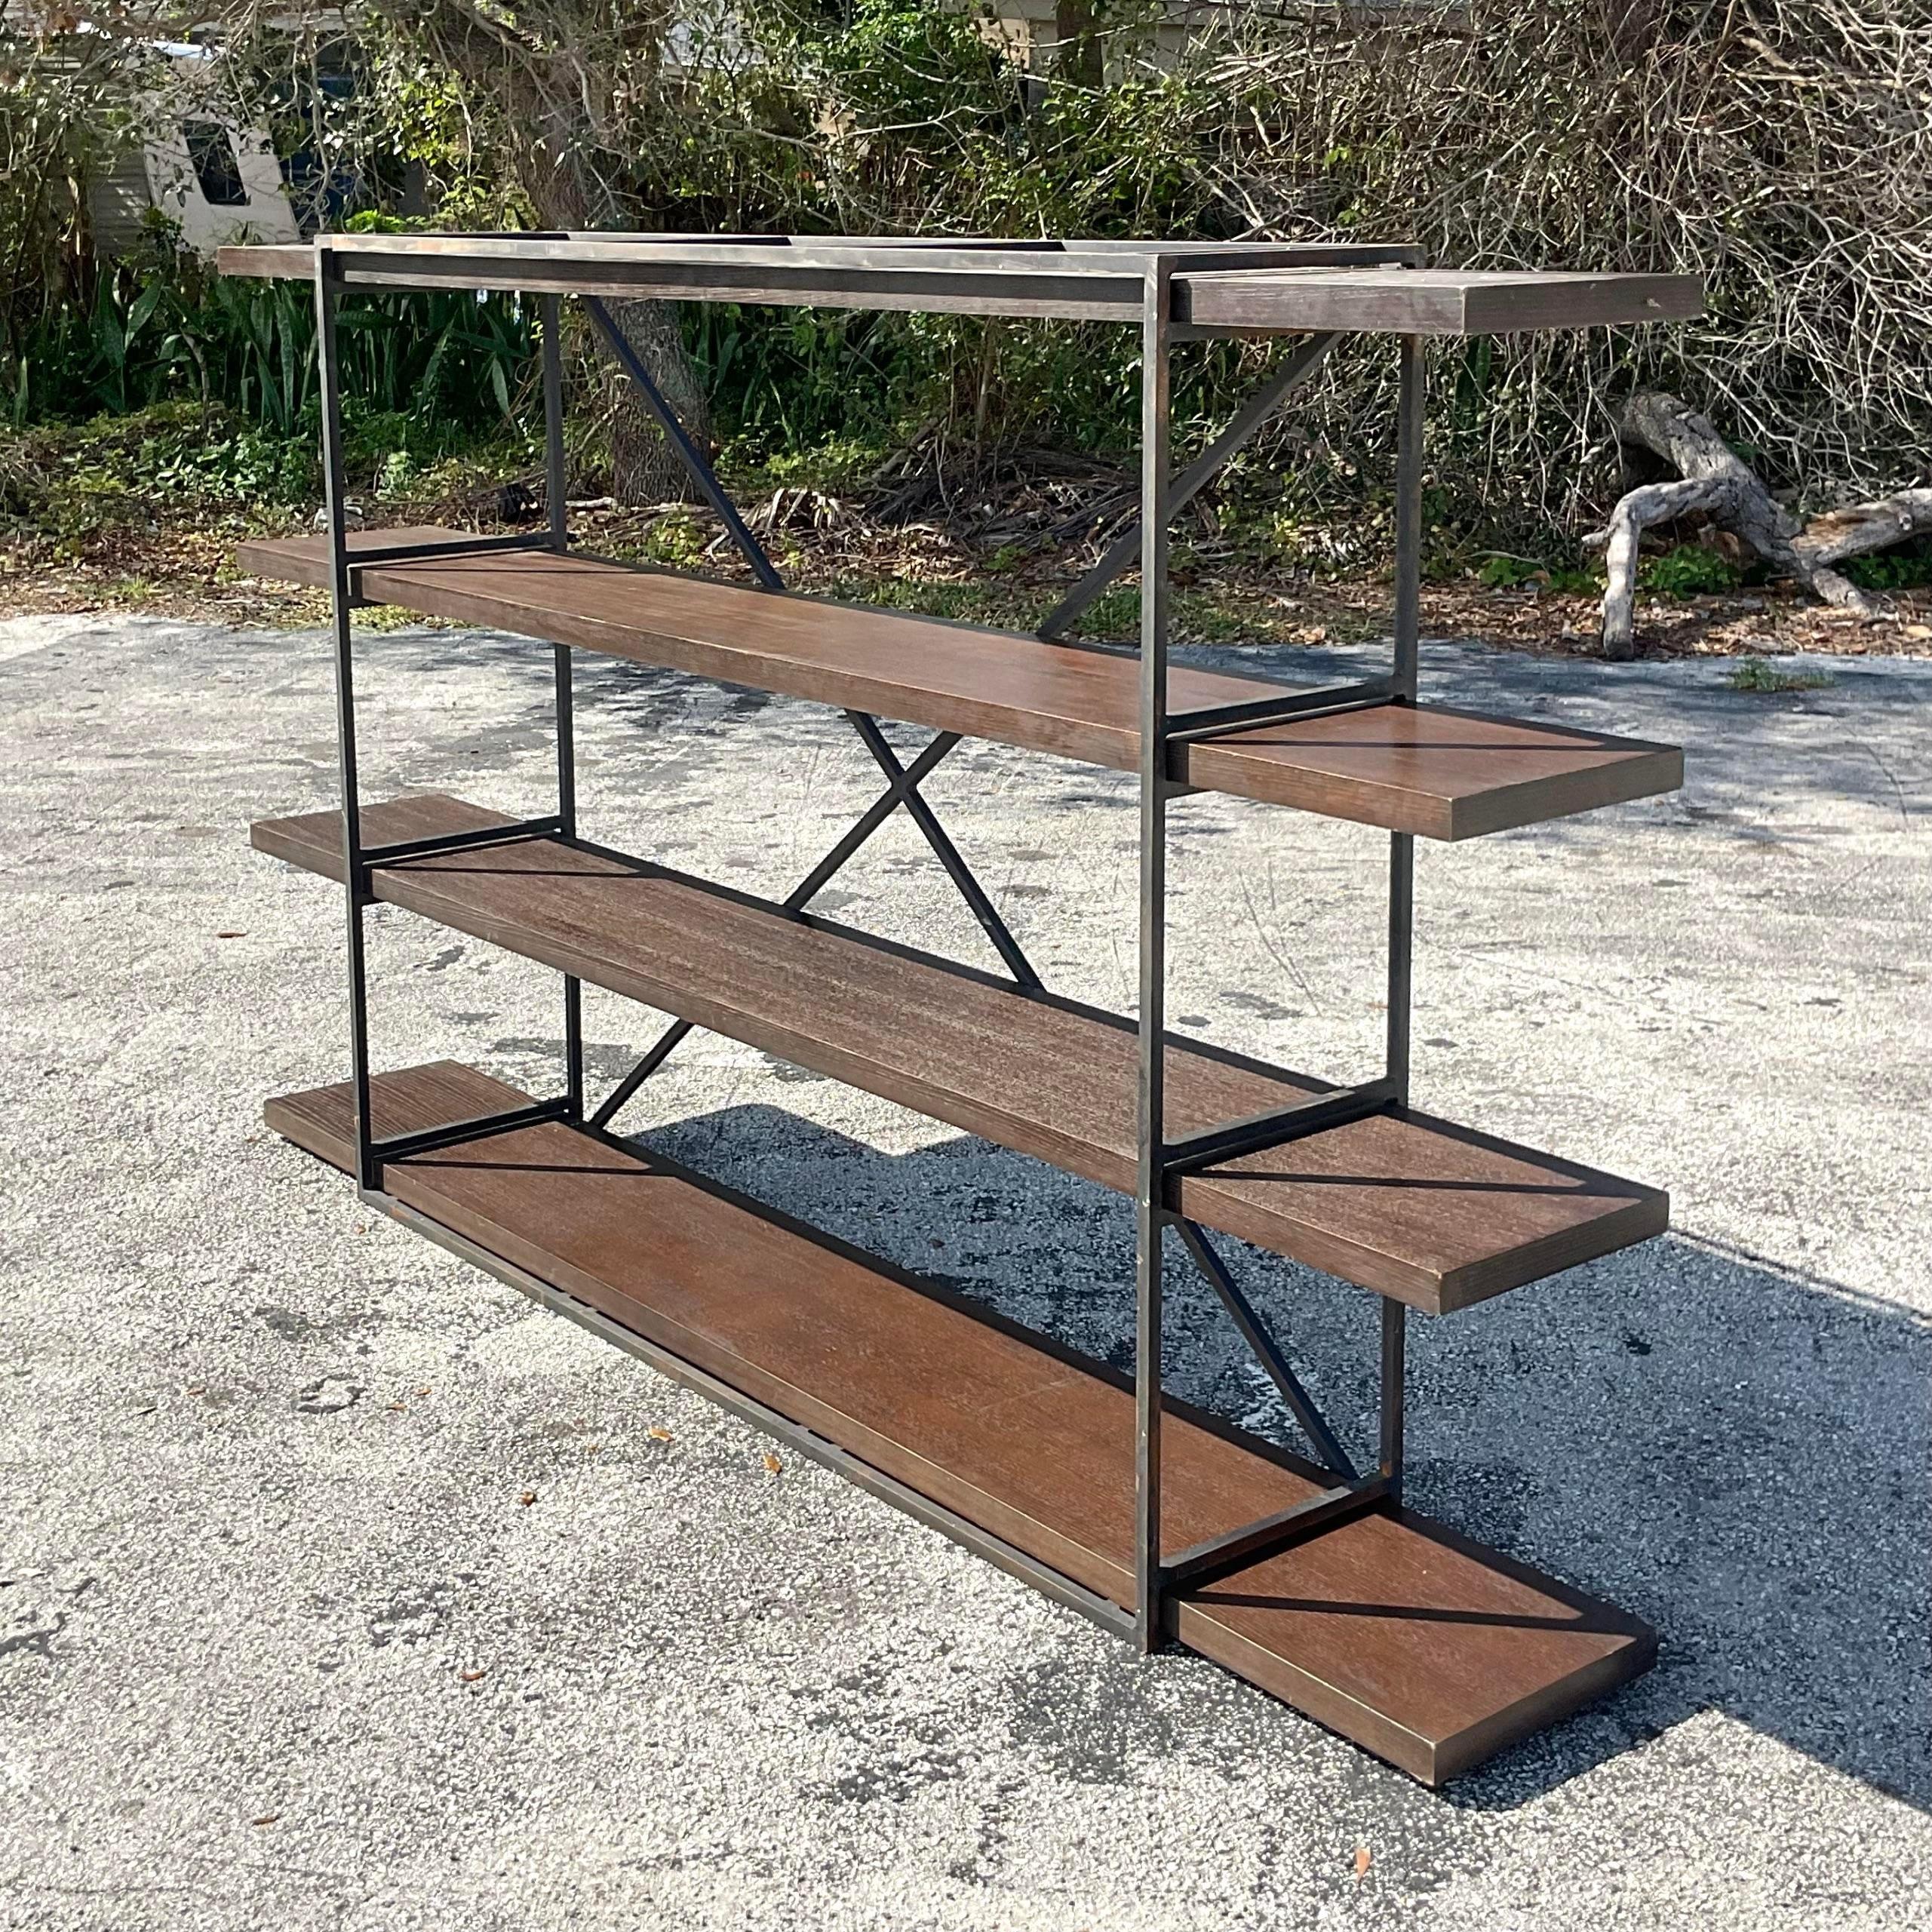 Vintage Boho Wrought Iron and Wood Plank Etagere infuses a touch of Americana into your living space. With its rugged yet refined design, this piece combines the durability of wrought iron with the warmth of wood, creating a versatile storage